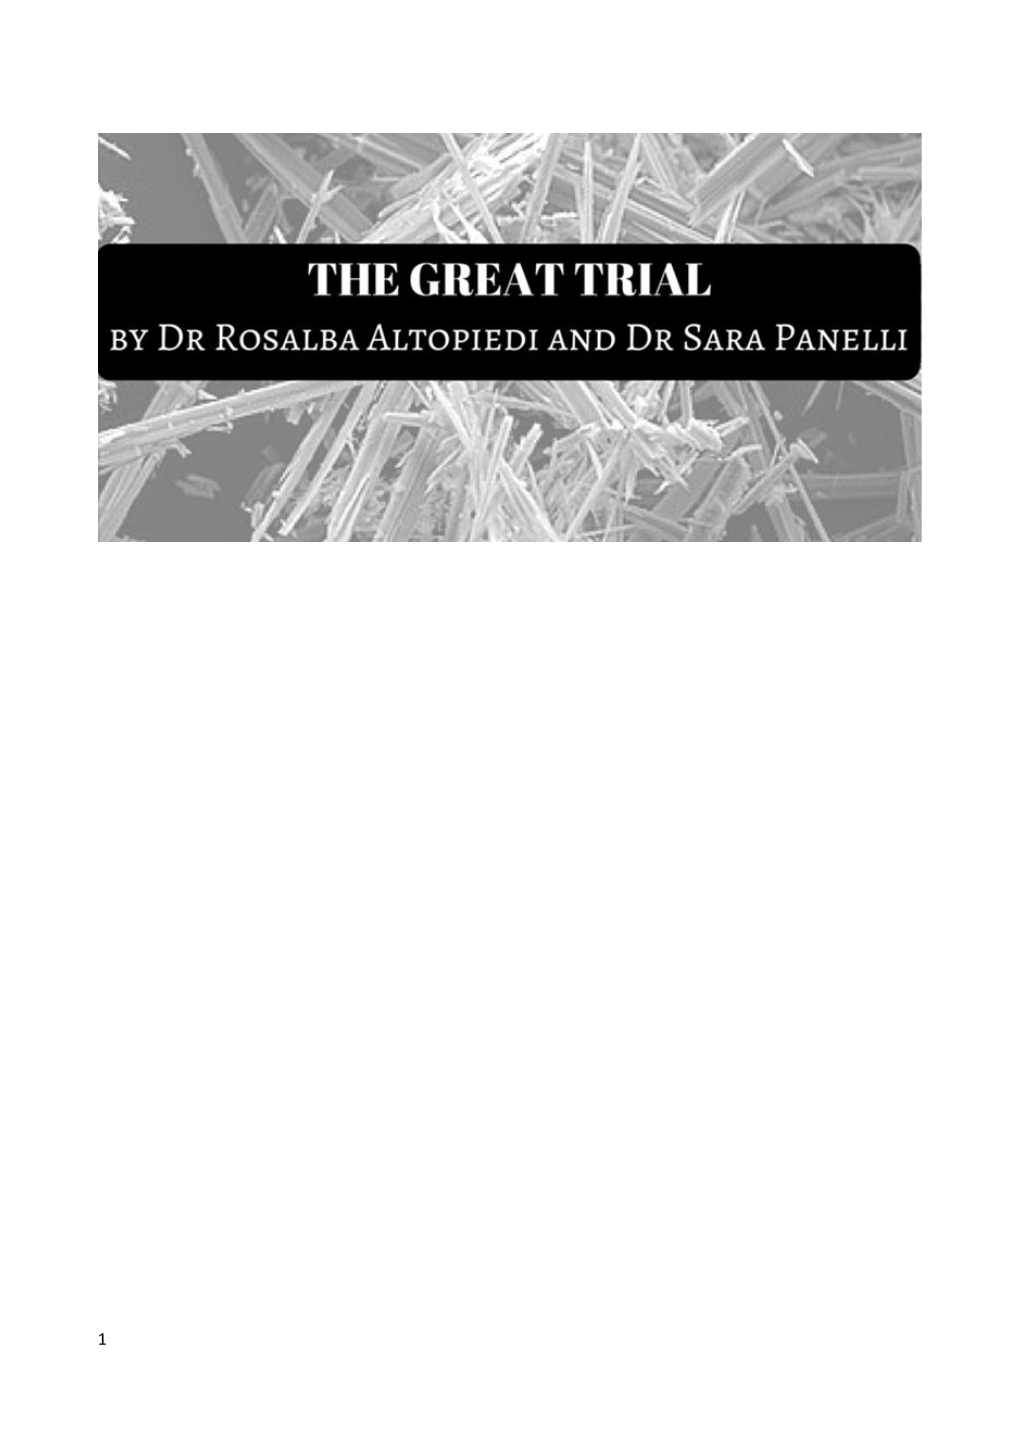 The Great Trial